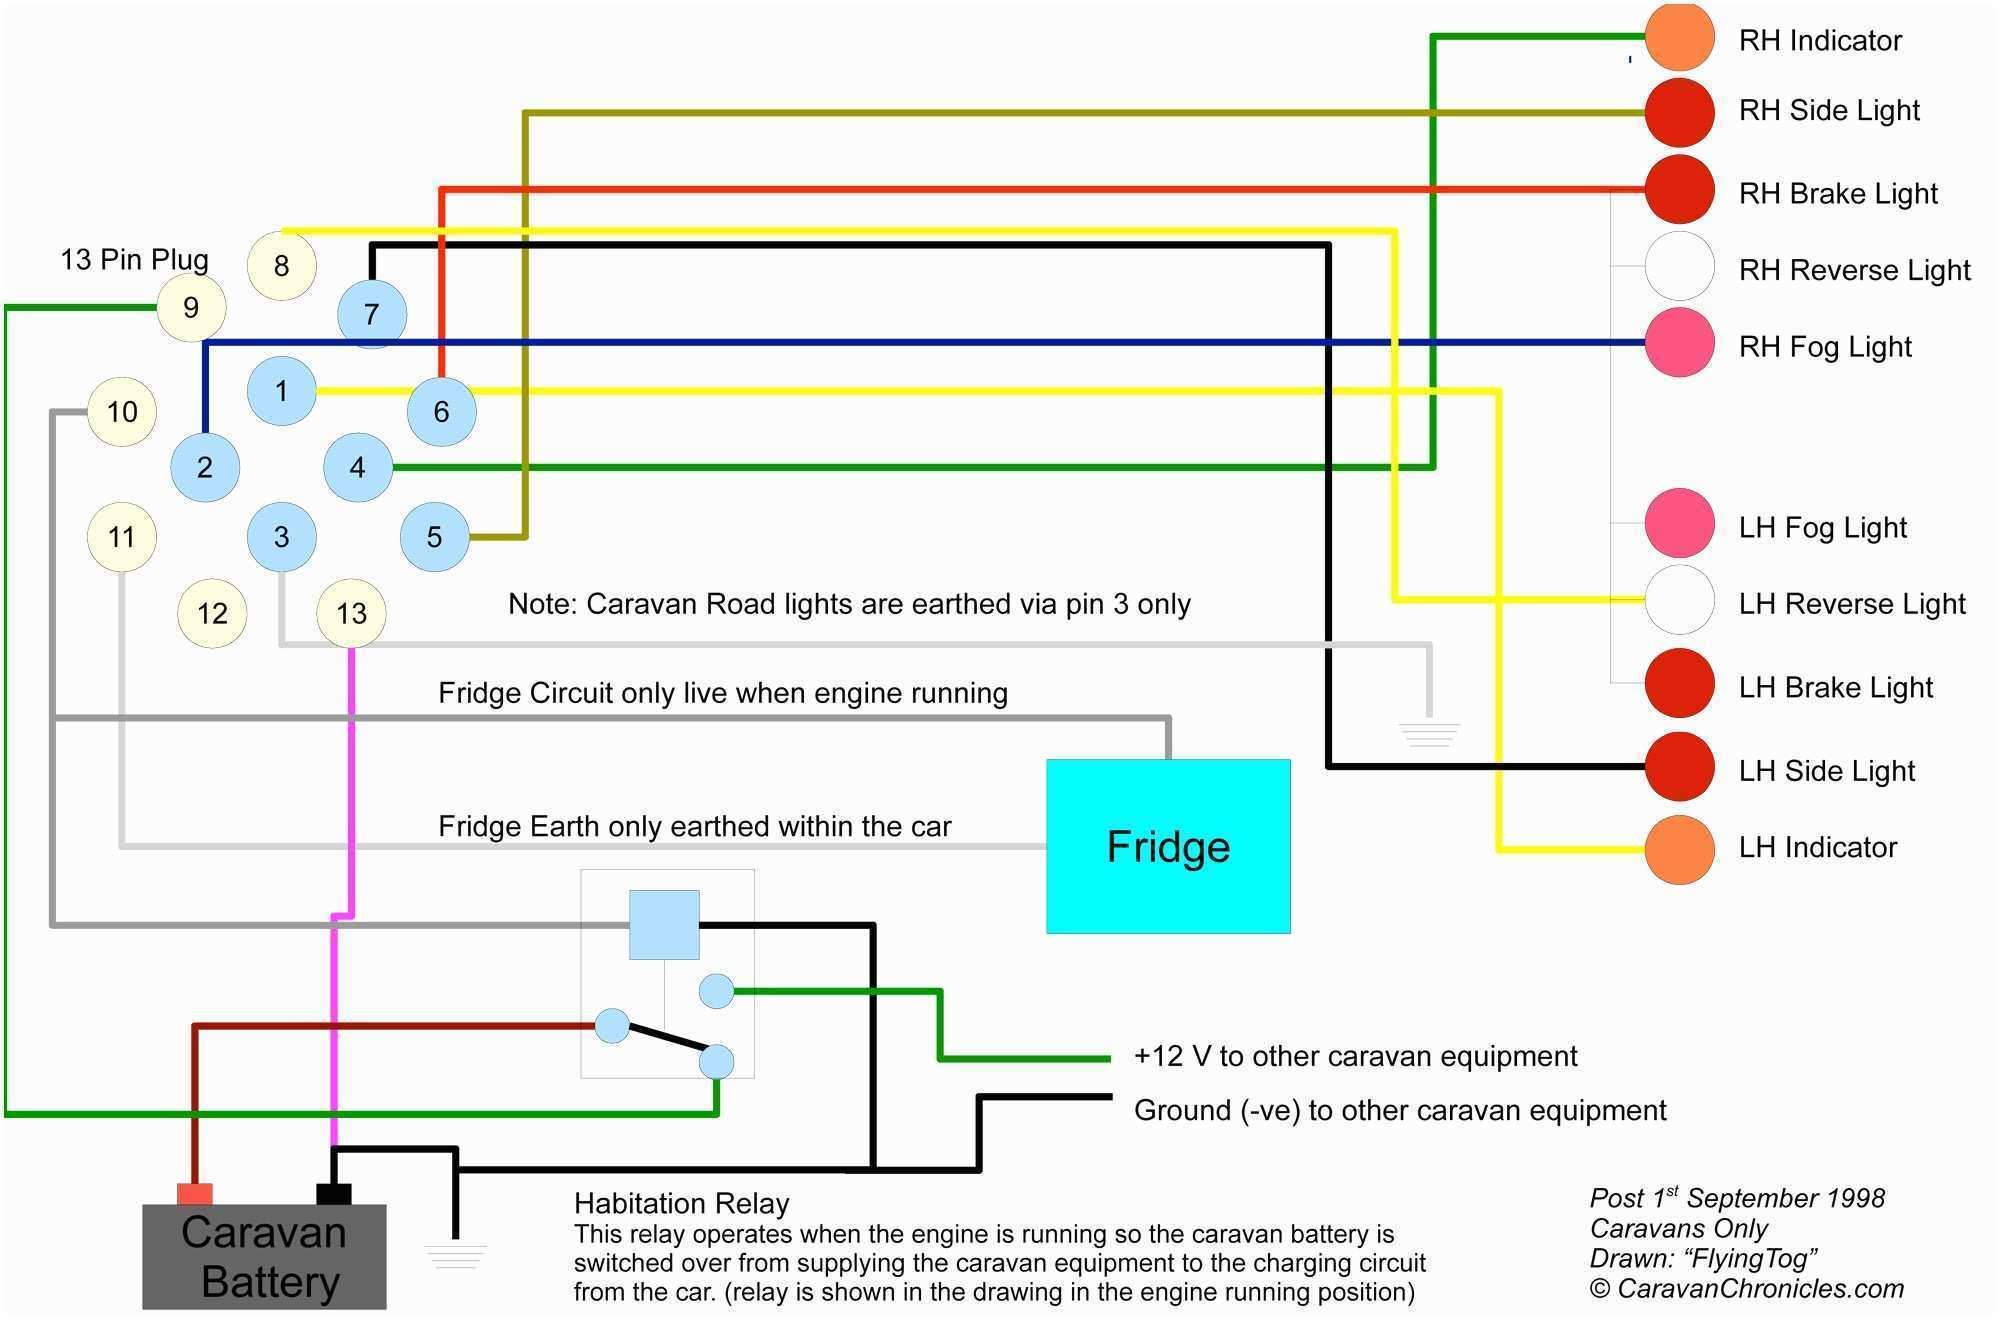 66 Fabulous Images Of 5 Wire Trailer To 4 Wire Plug | Wiring - 5 Wire Trailer Wiring Diagram